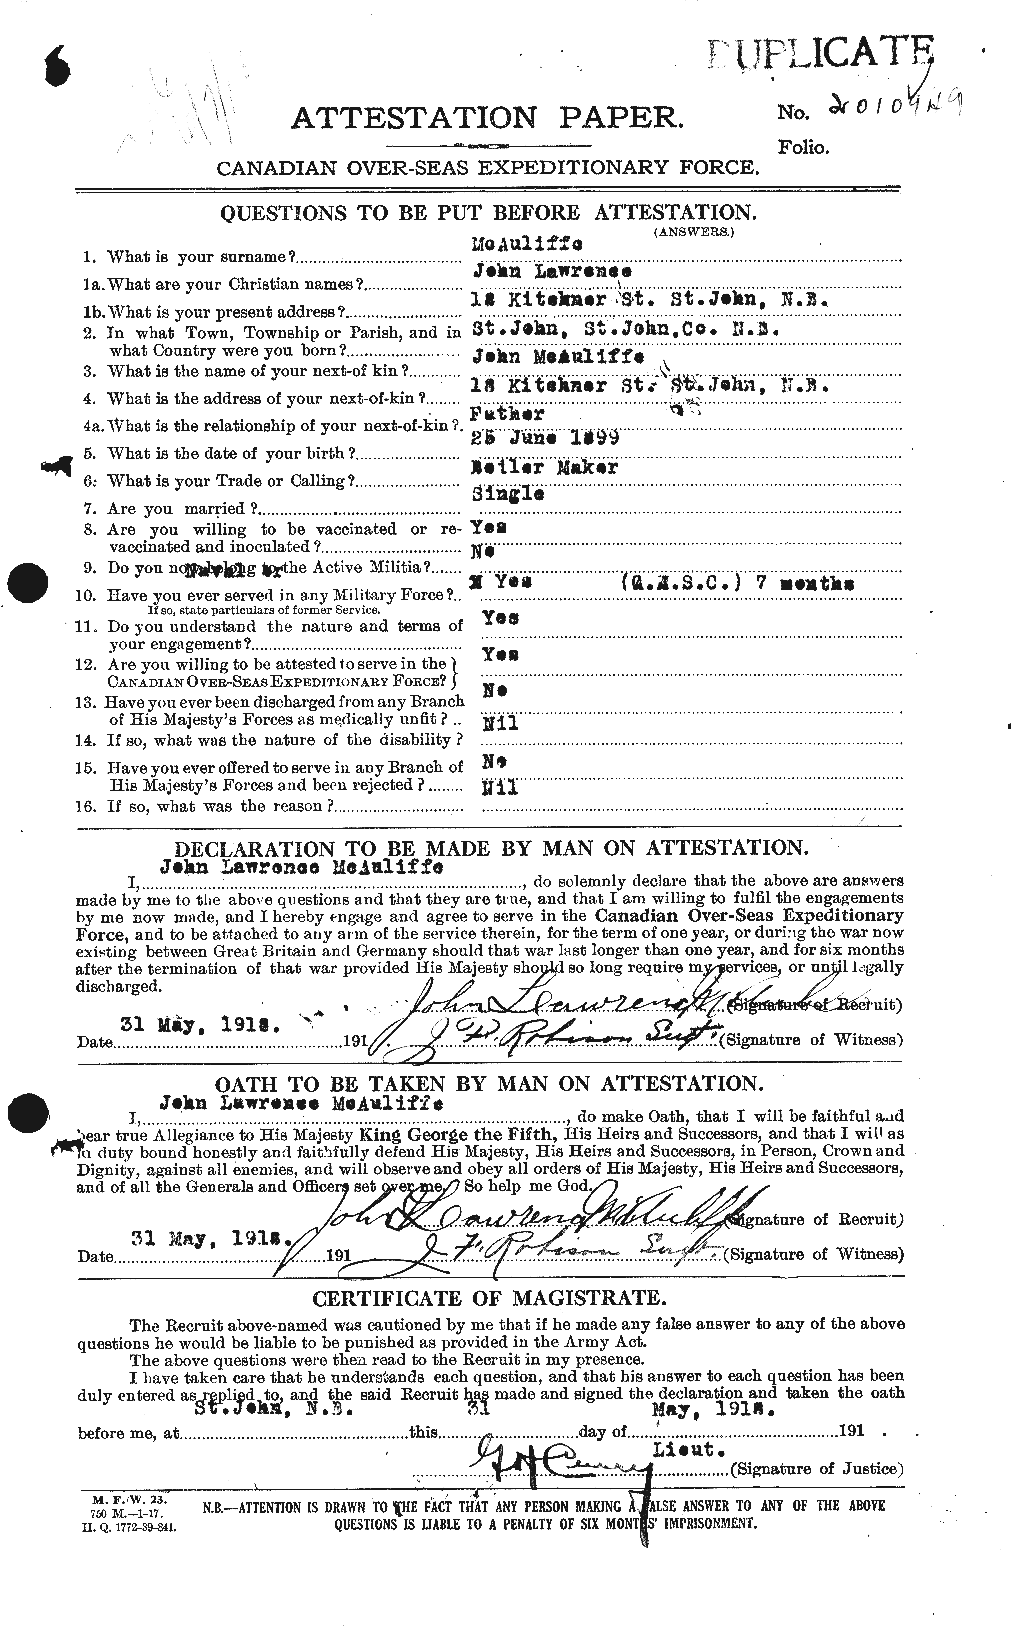 Personnel Records of the First World War - CEF 130245a